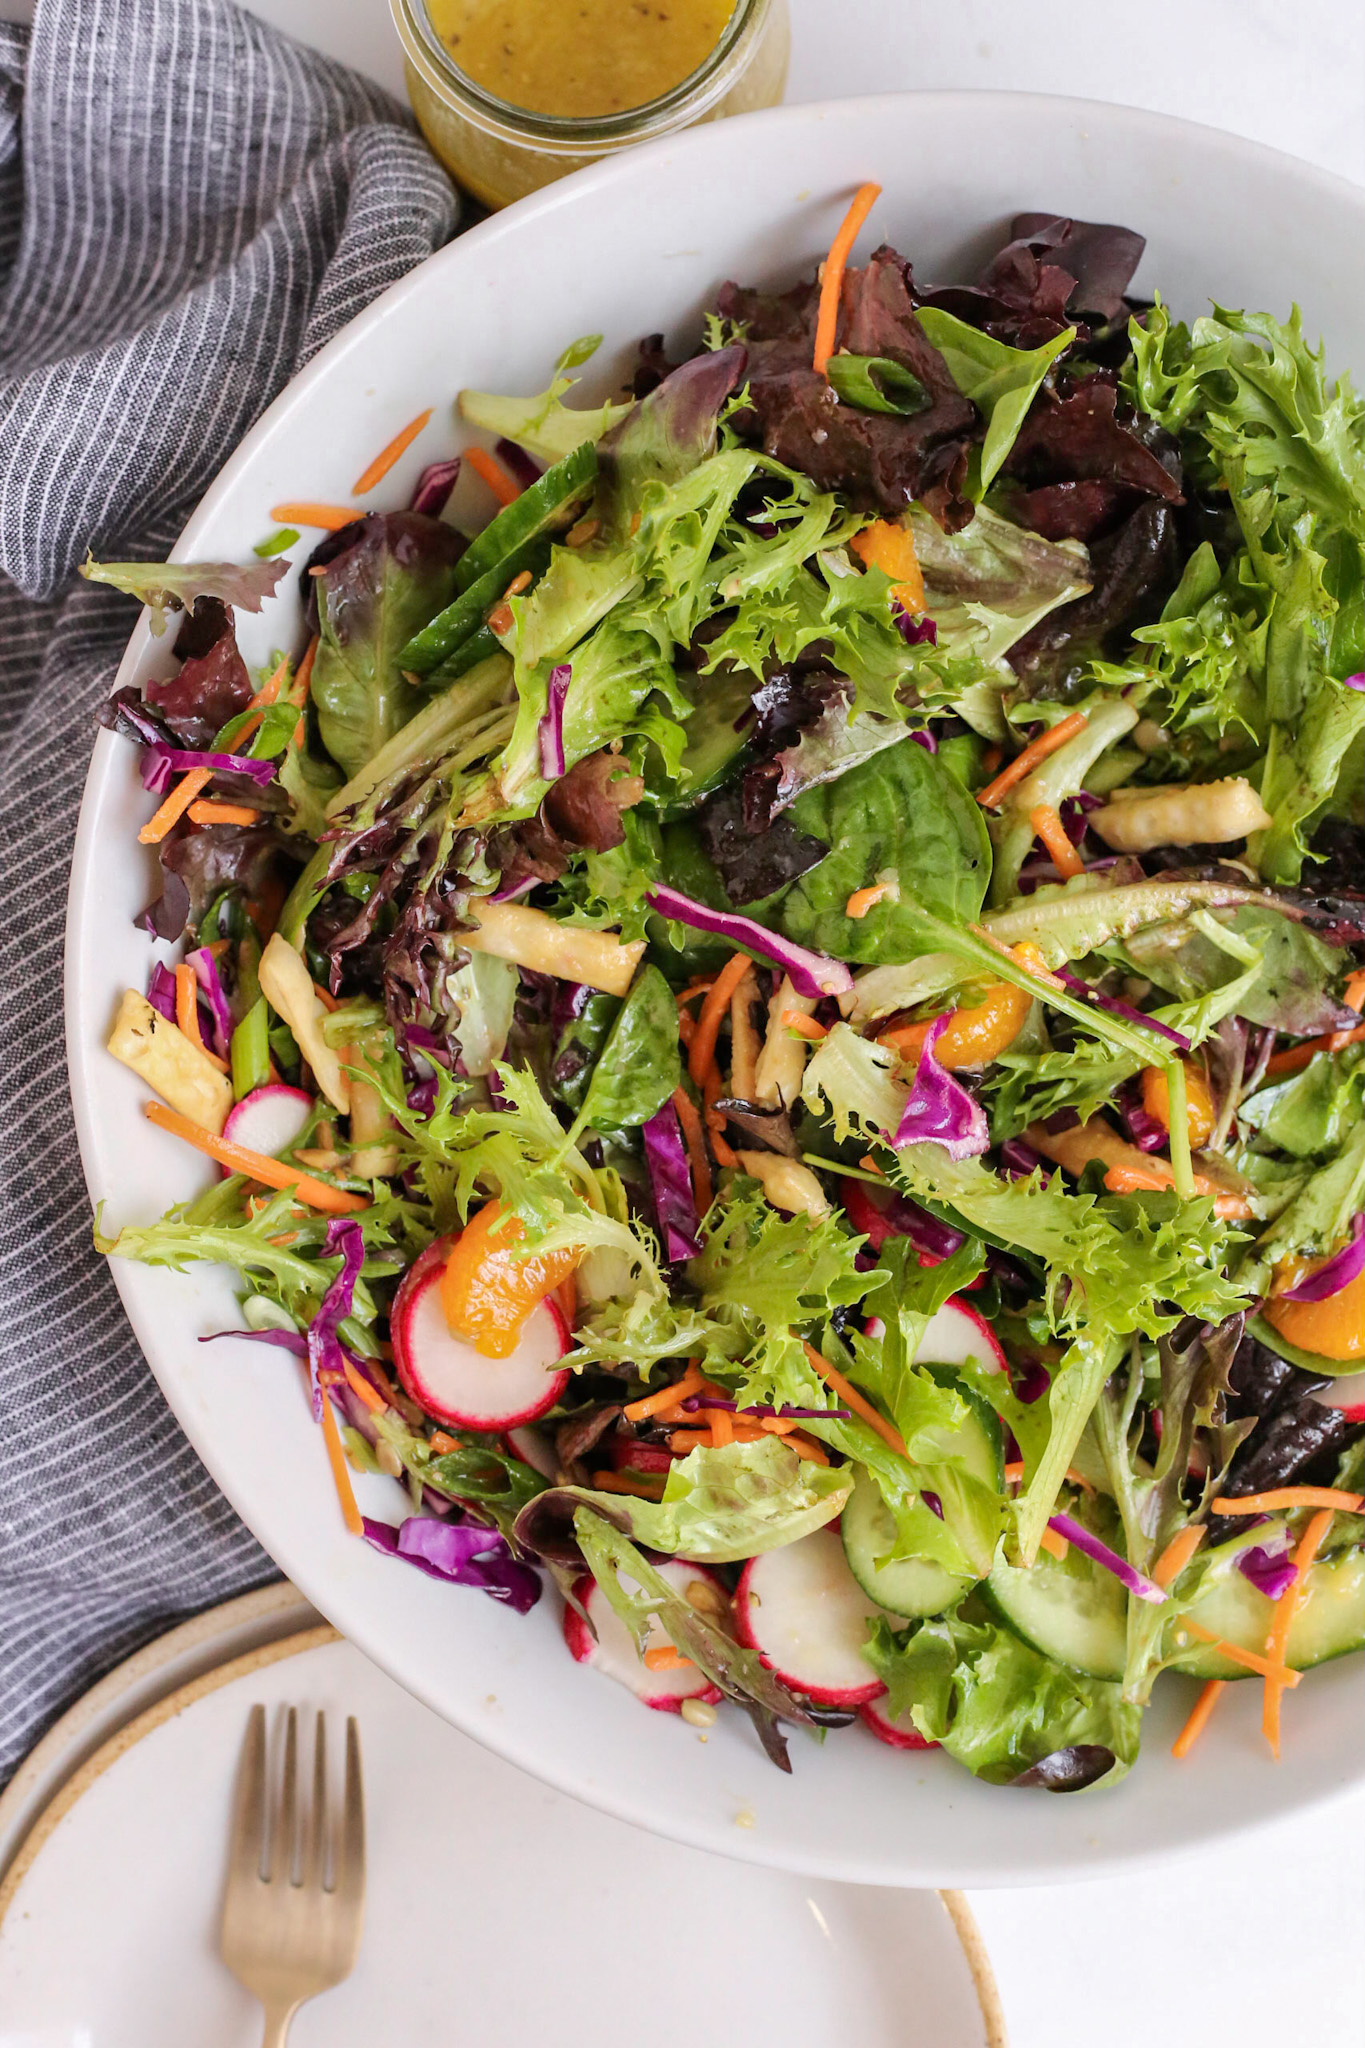 Overhead view of a large serving bowl full of a mixed greens salad with shredded carrots and cabbage, sliced green onions and radishes, sunflower seeds, wonton strips, and a yuzu dressing on a kitchen countertop